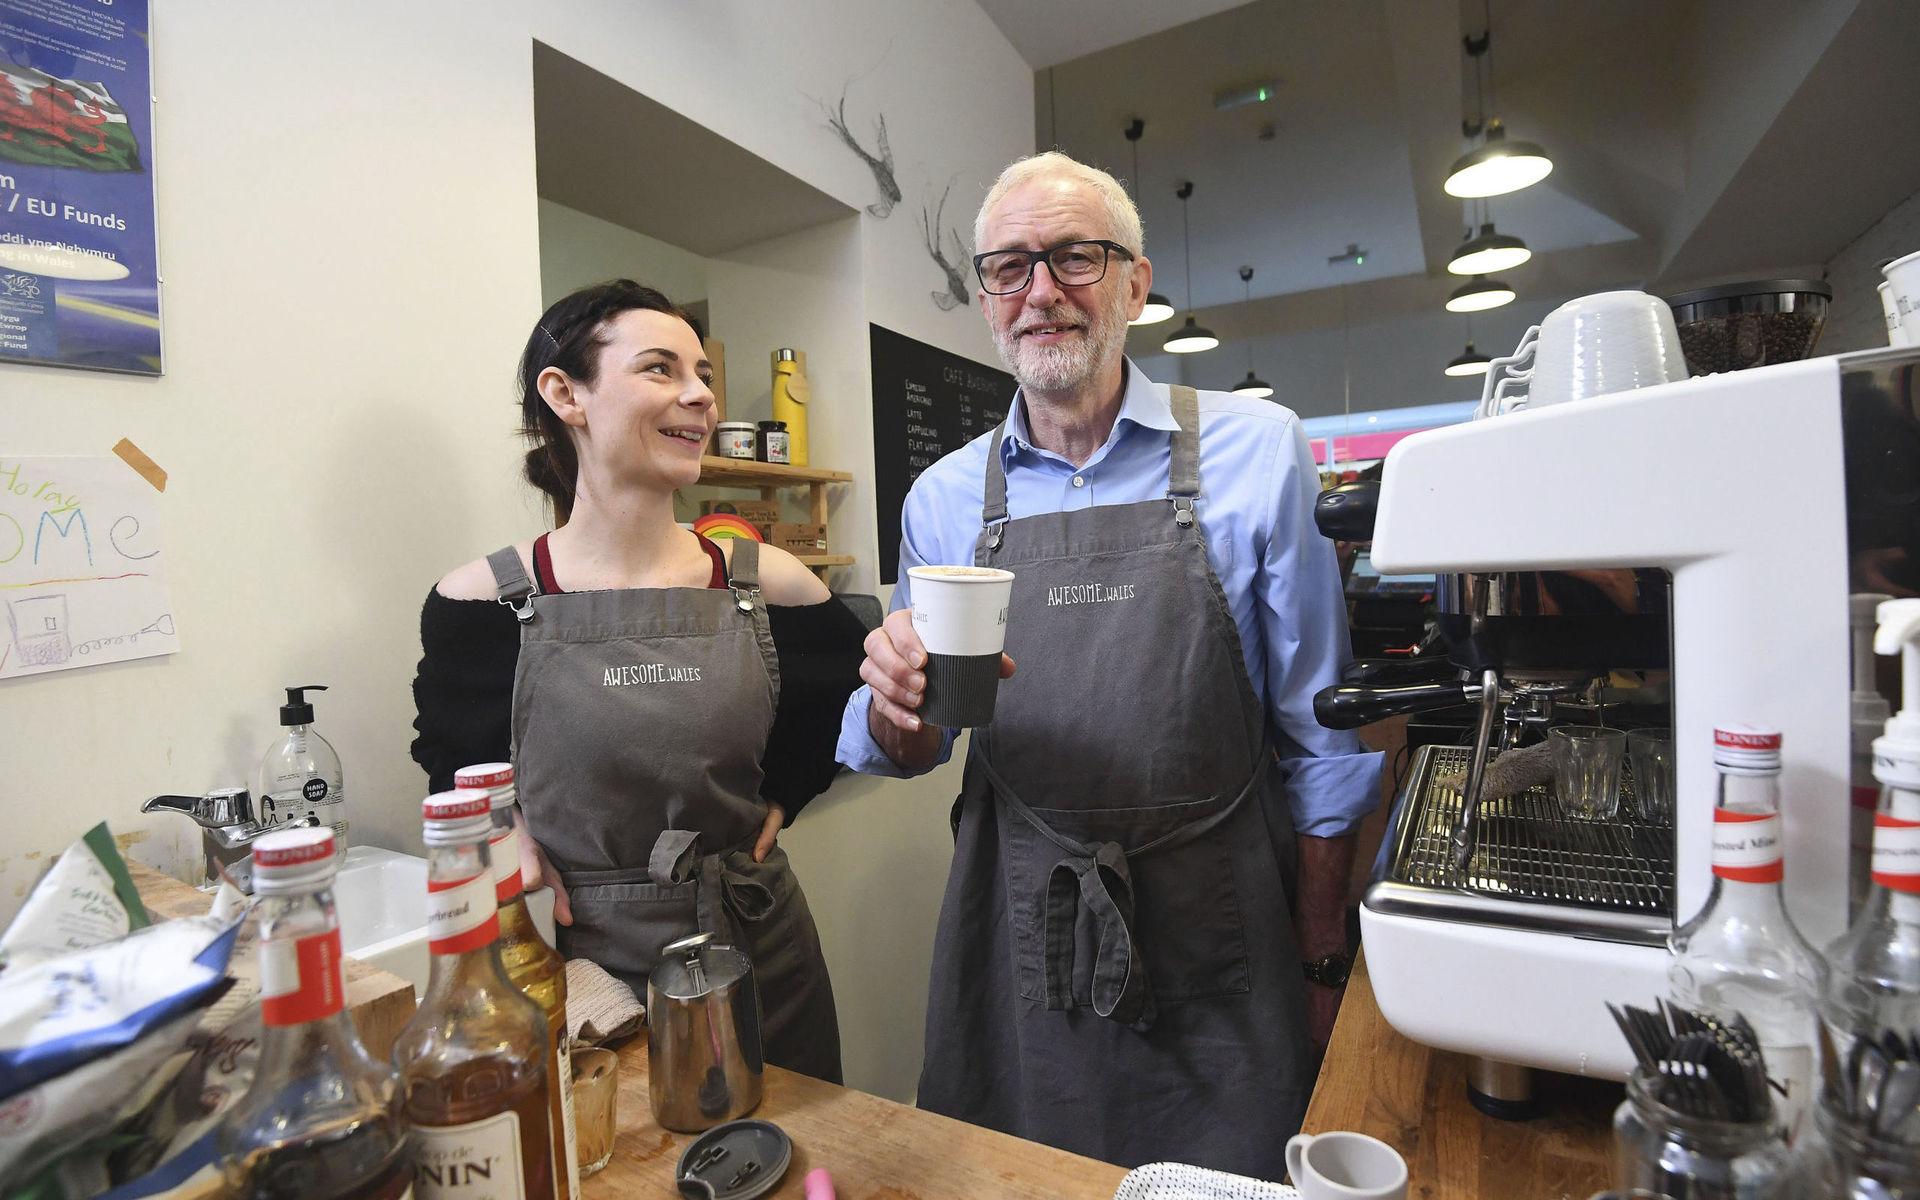 Labour Party leader Jeremy Corbyn poses for a photo in a coffee shop to mark Small Business Saturday, while on the General Election campaign trail in Barry, Wales, Saturday, Dec. 7, 2019. Britain goes to the polls on Dec. 12  (Victoria Jones/PA via AP)  LON802